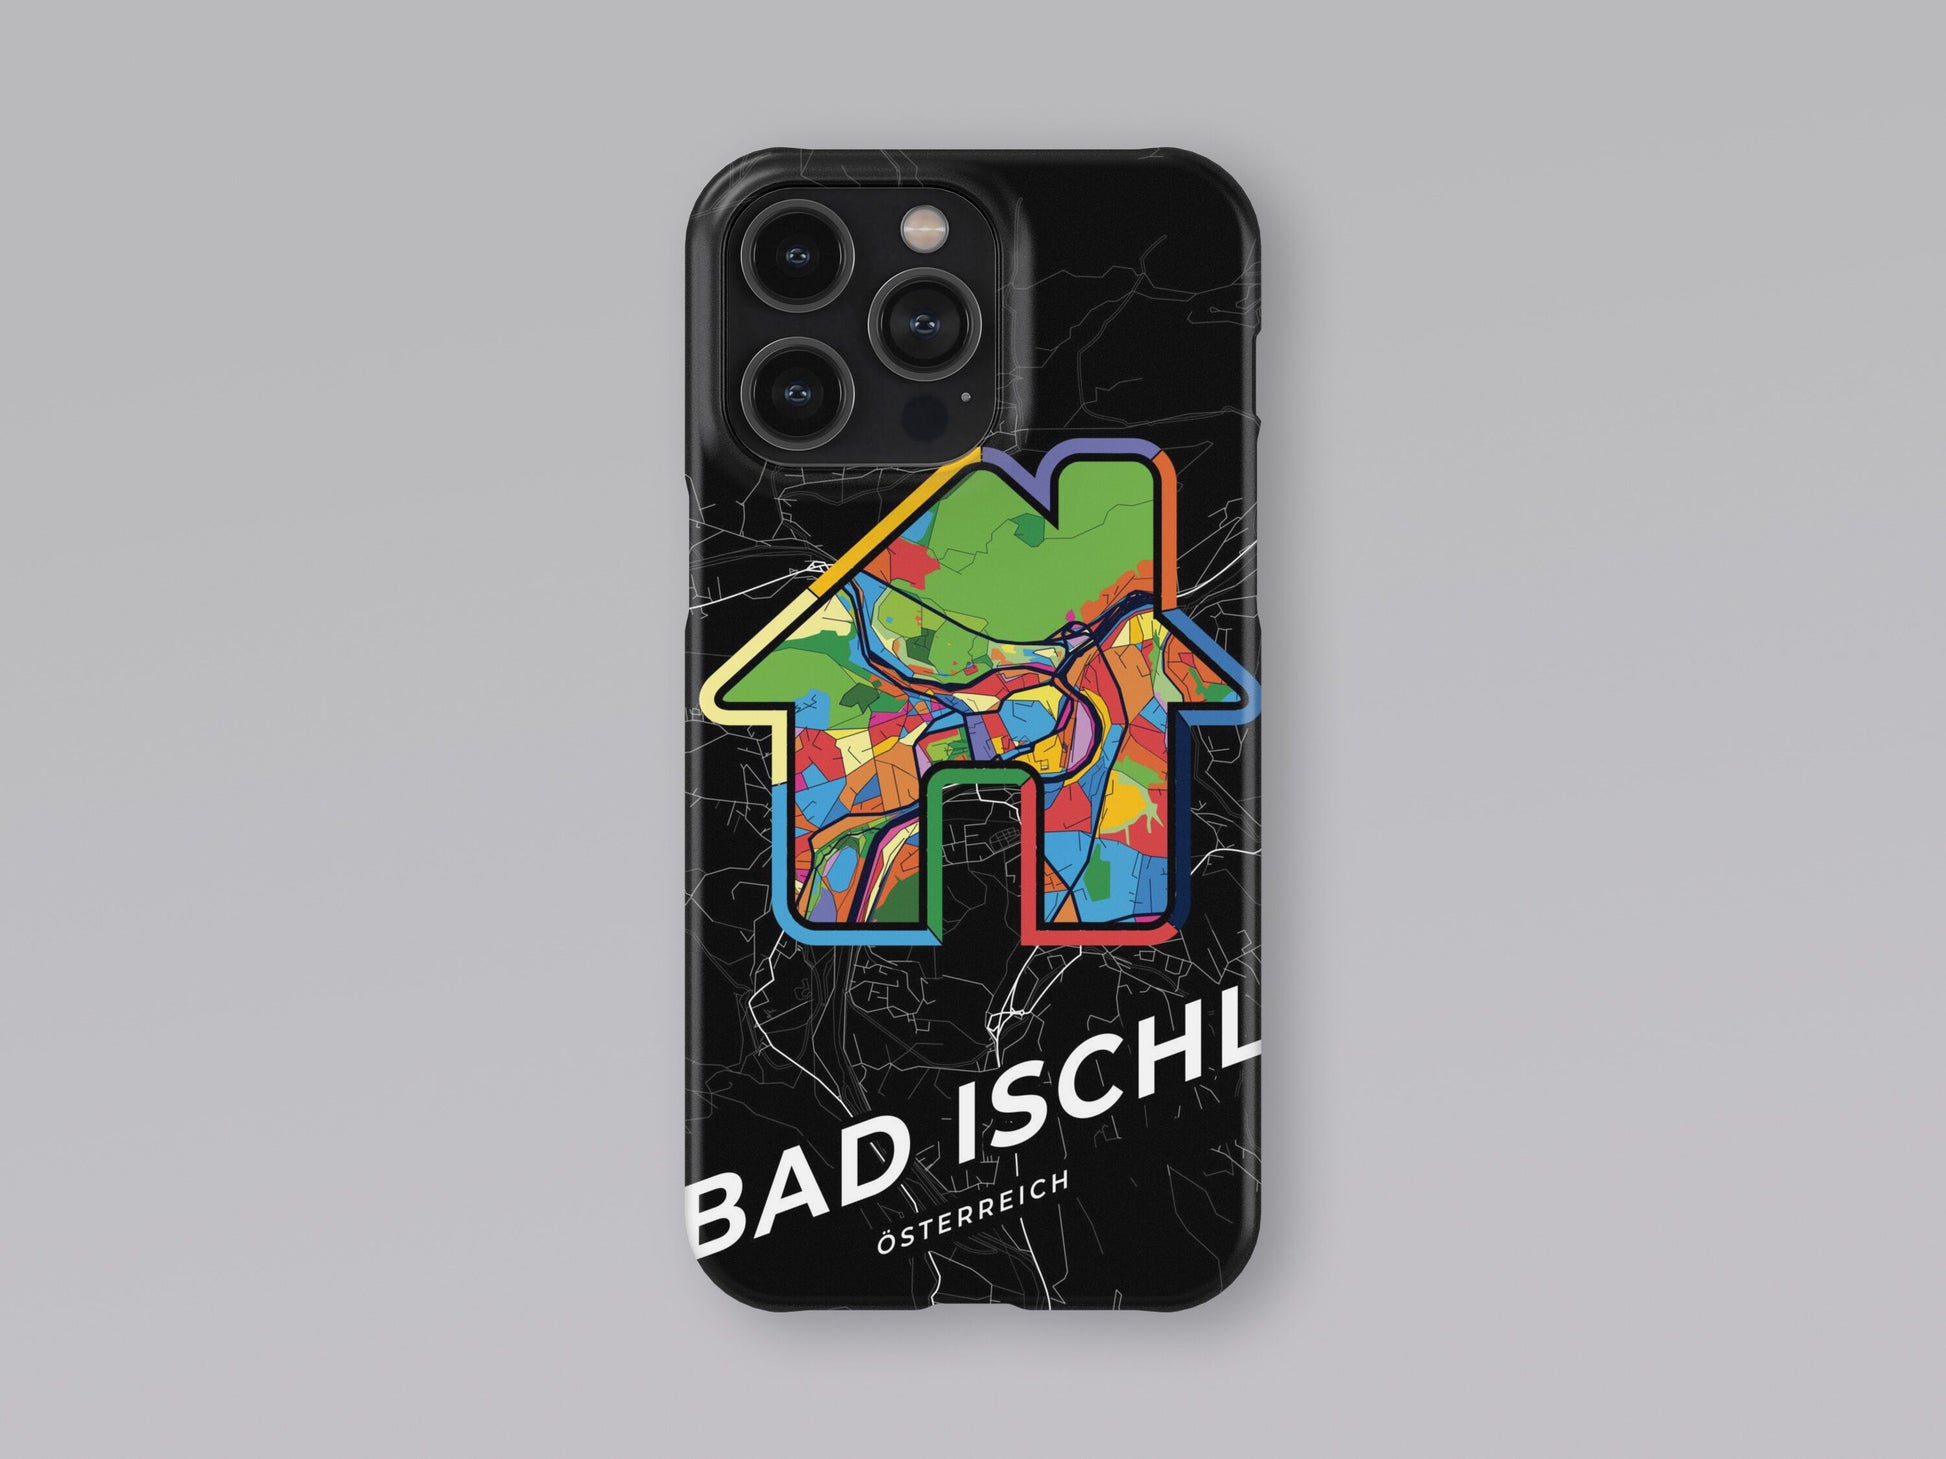 Bad Ischl Österreich slim phone case with colorful icon. Birthday, wedding or housewarming gift. Couple match cases. 3